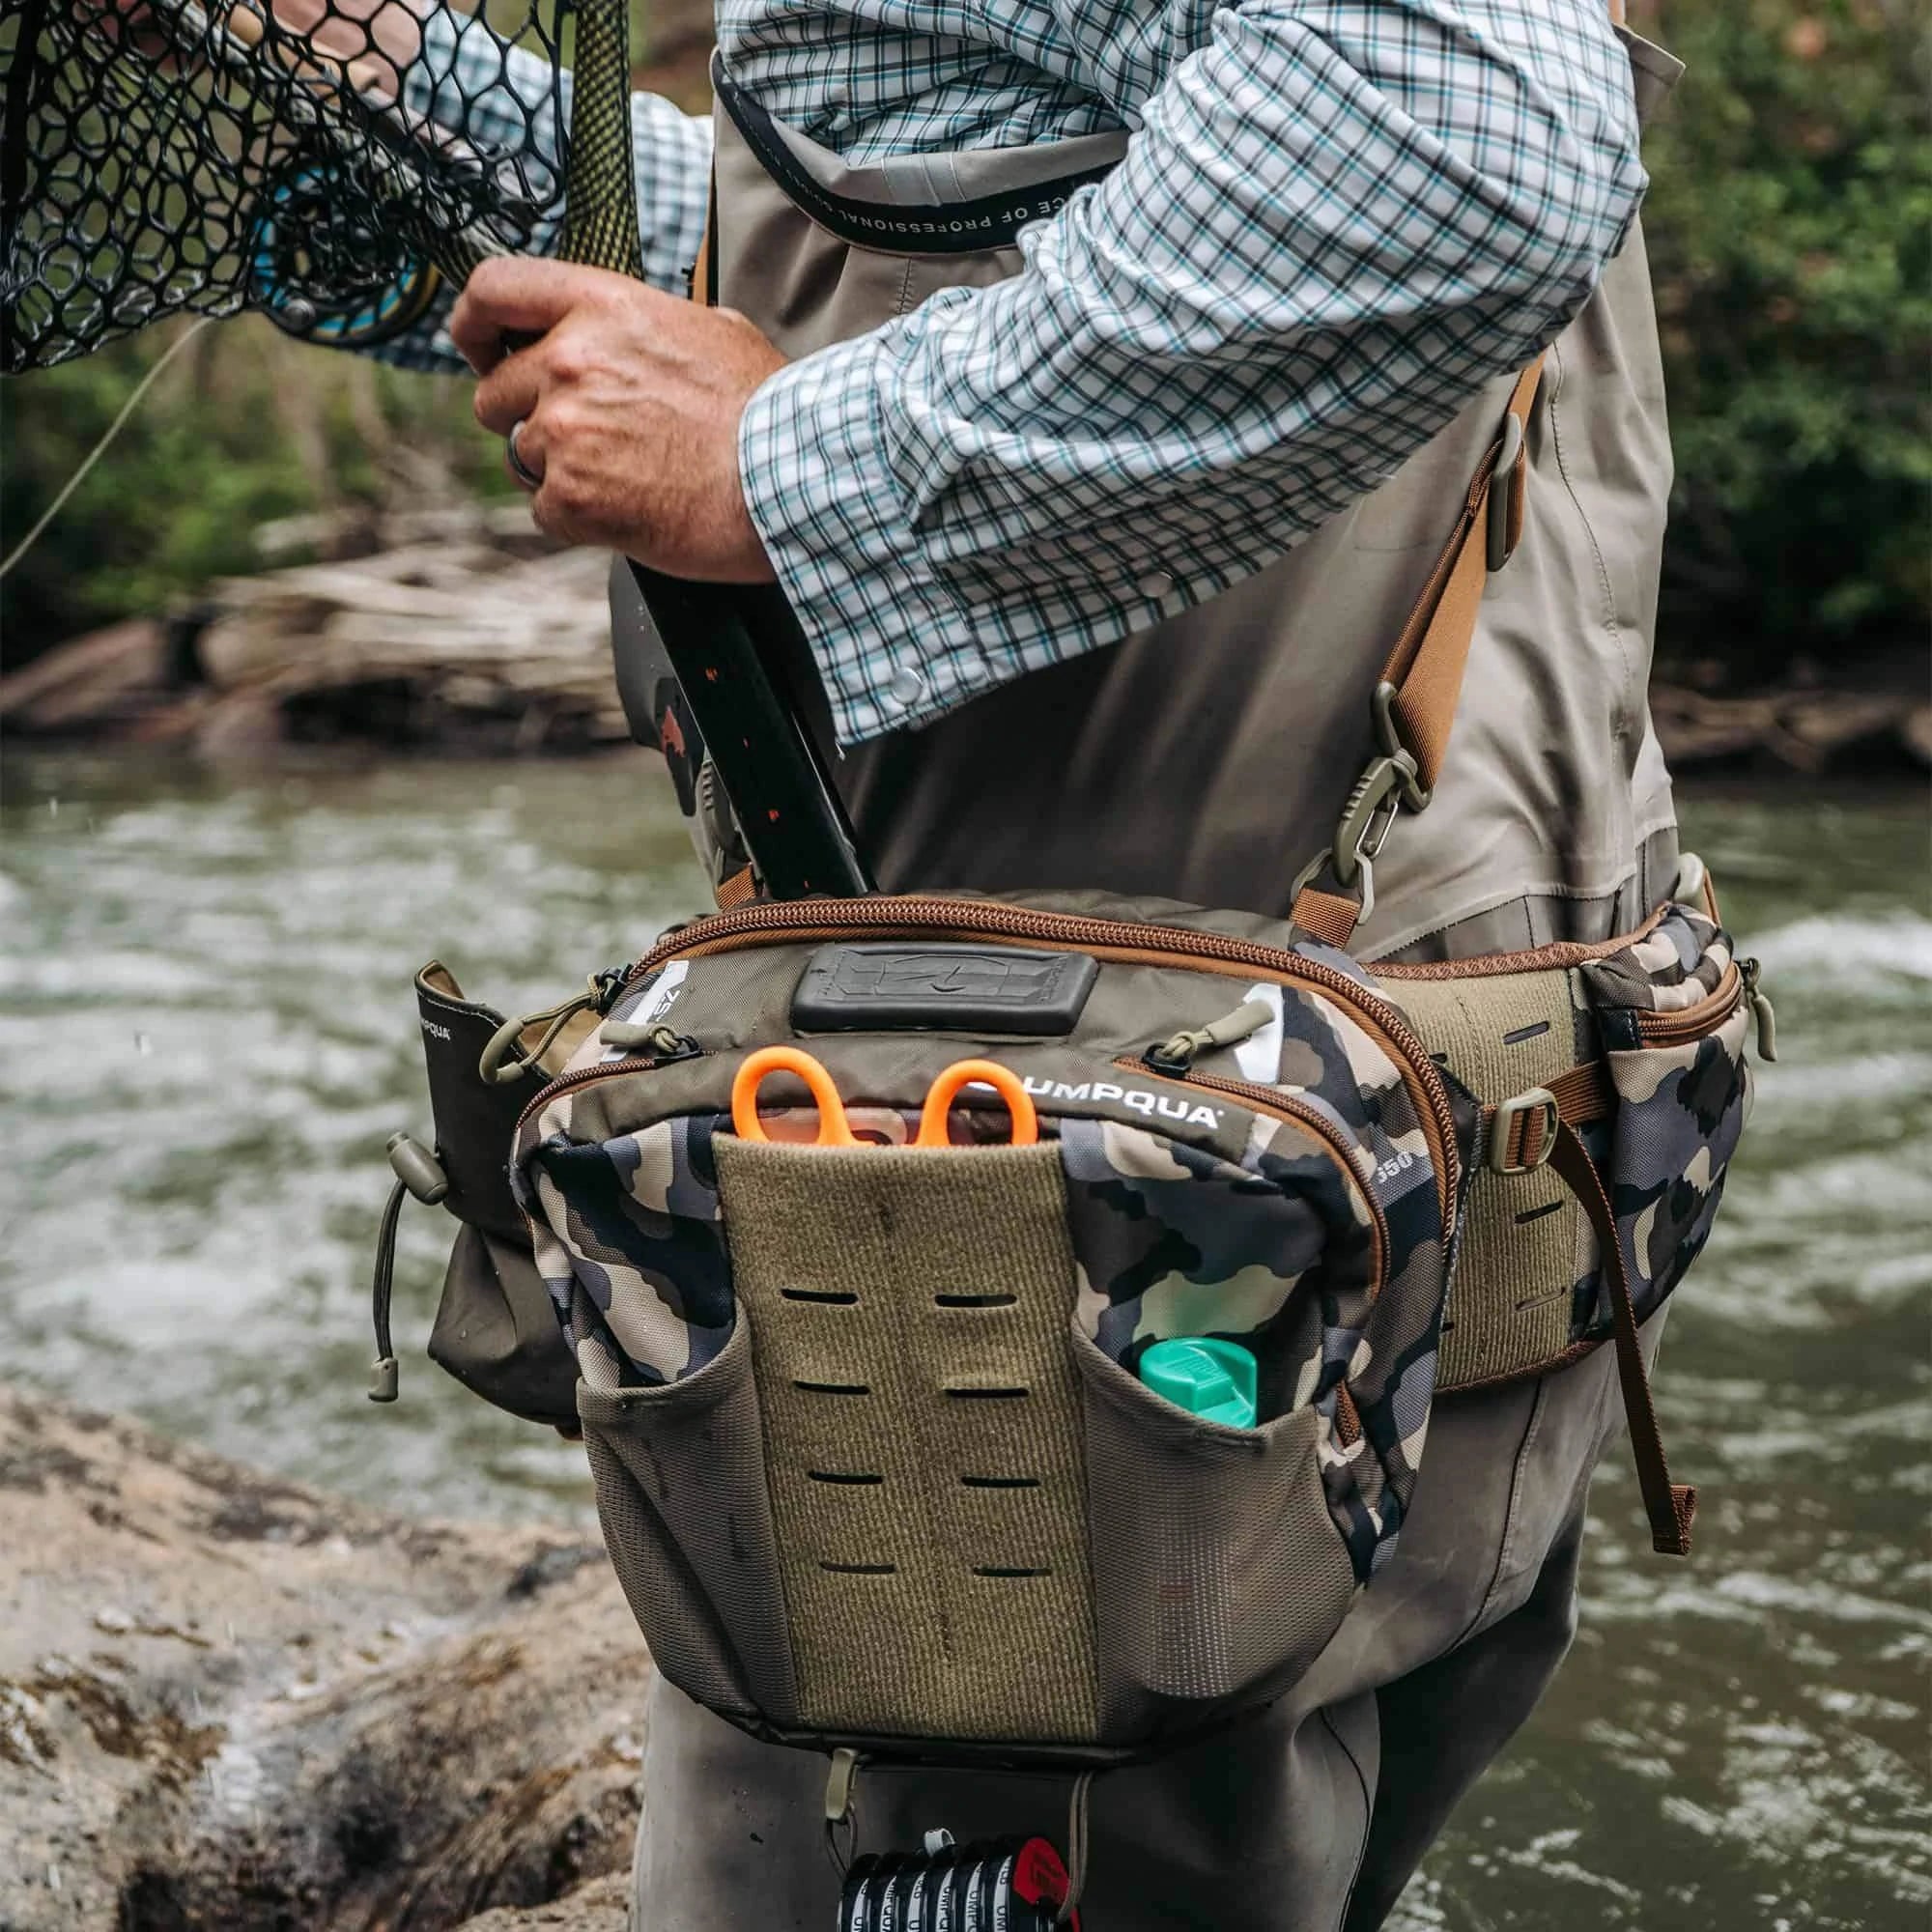 Umpqua Overloook 500 ZS2 Chest Pack Kit – Tactical Fly Fisher